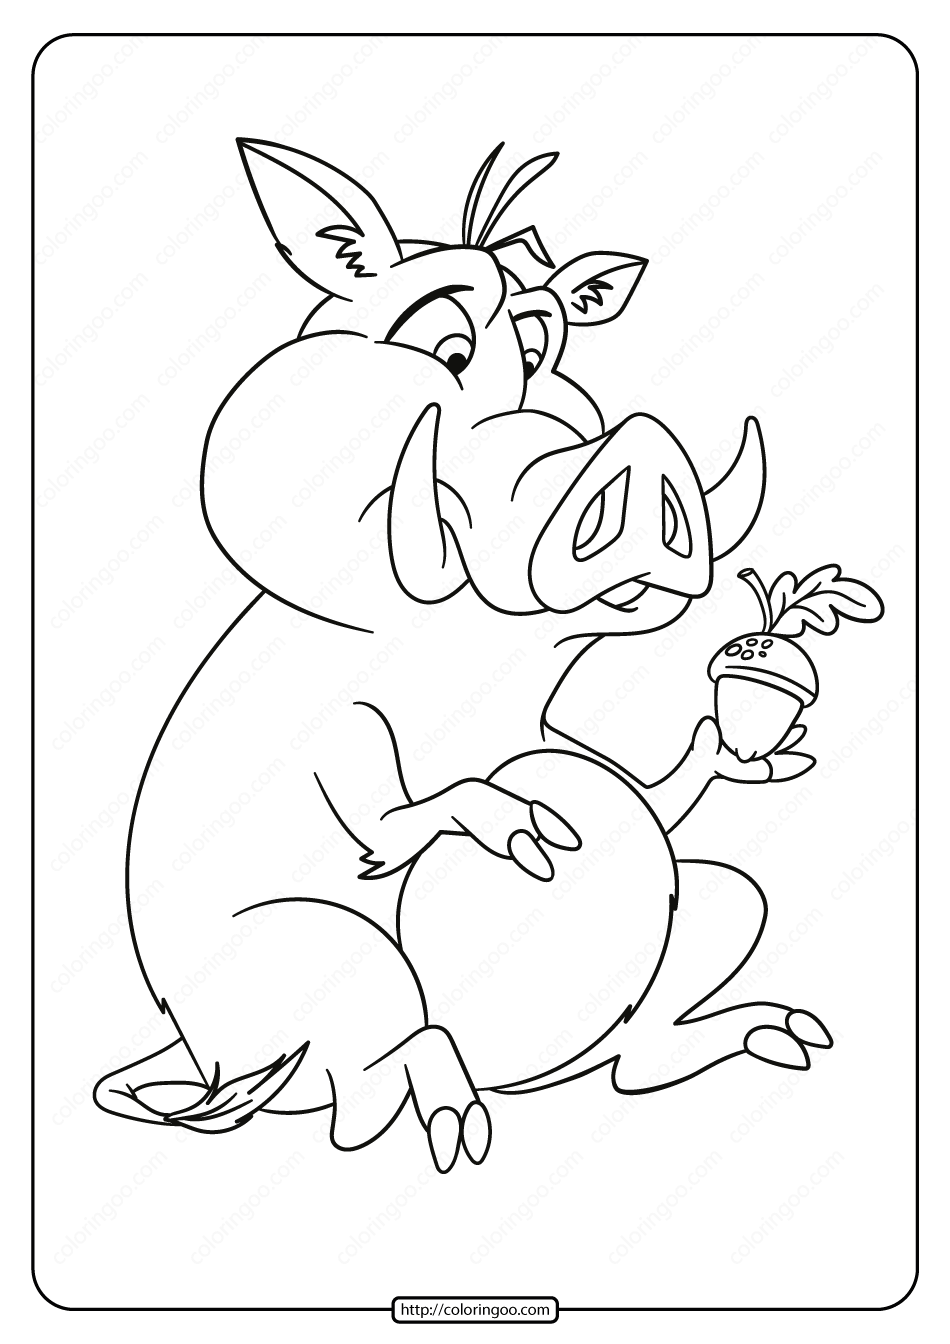 printable pig with an acorn pdf coloring page